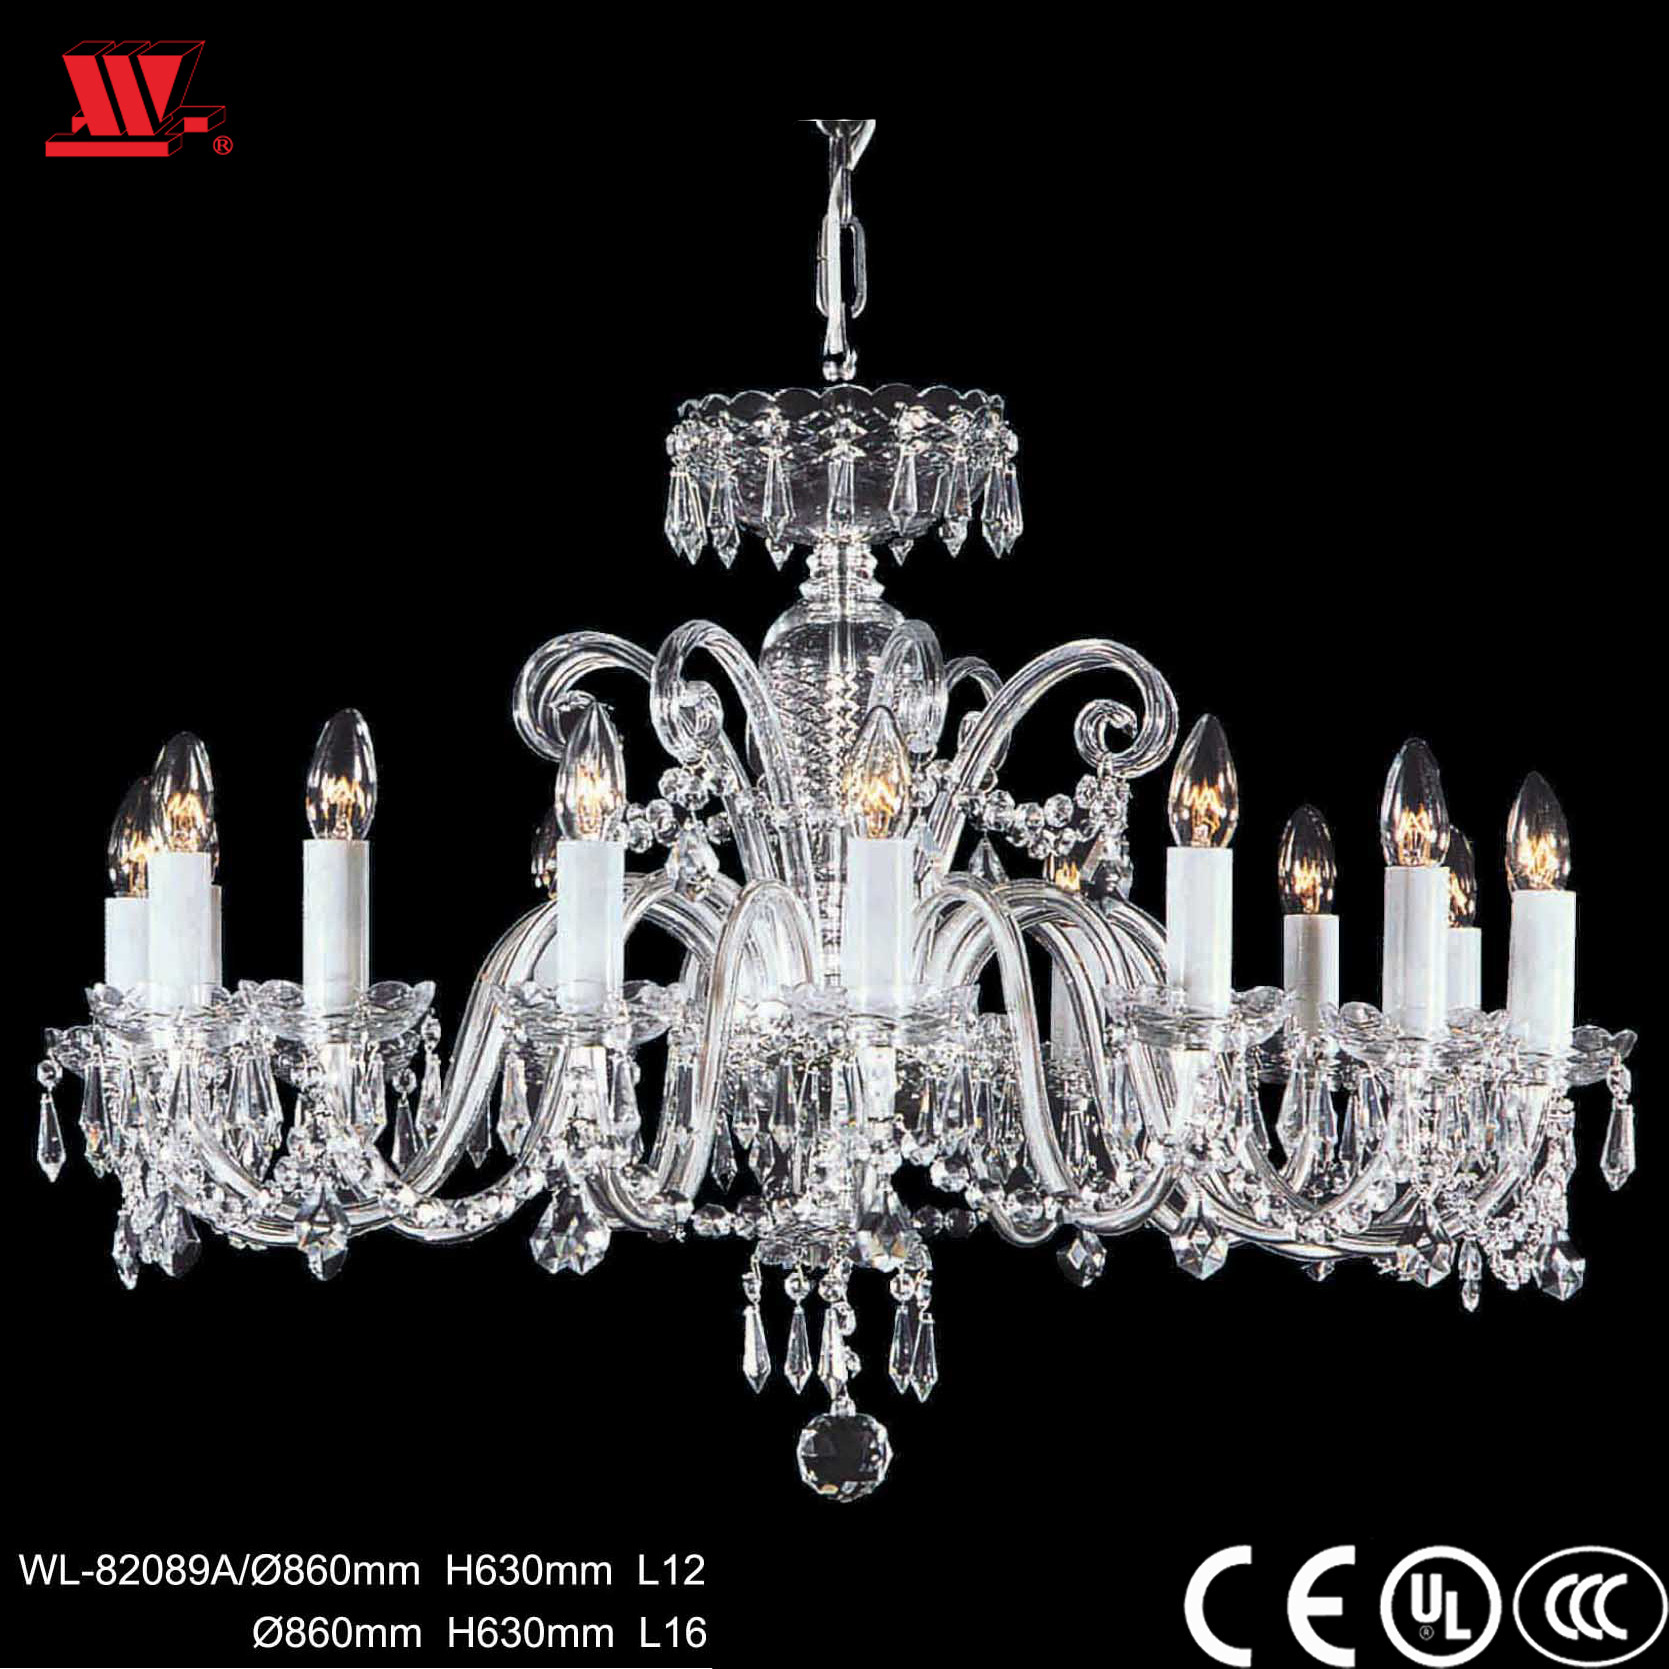 Traditional Glass Arm Chandelier with Crystal Wl-82089A